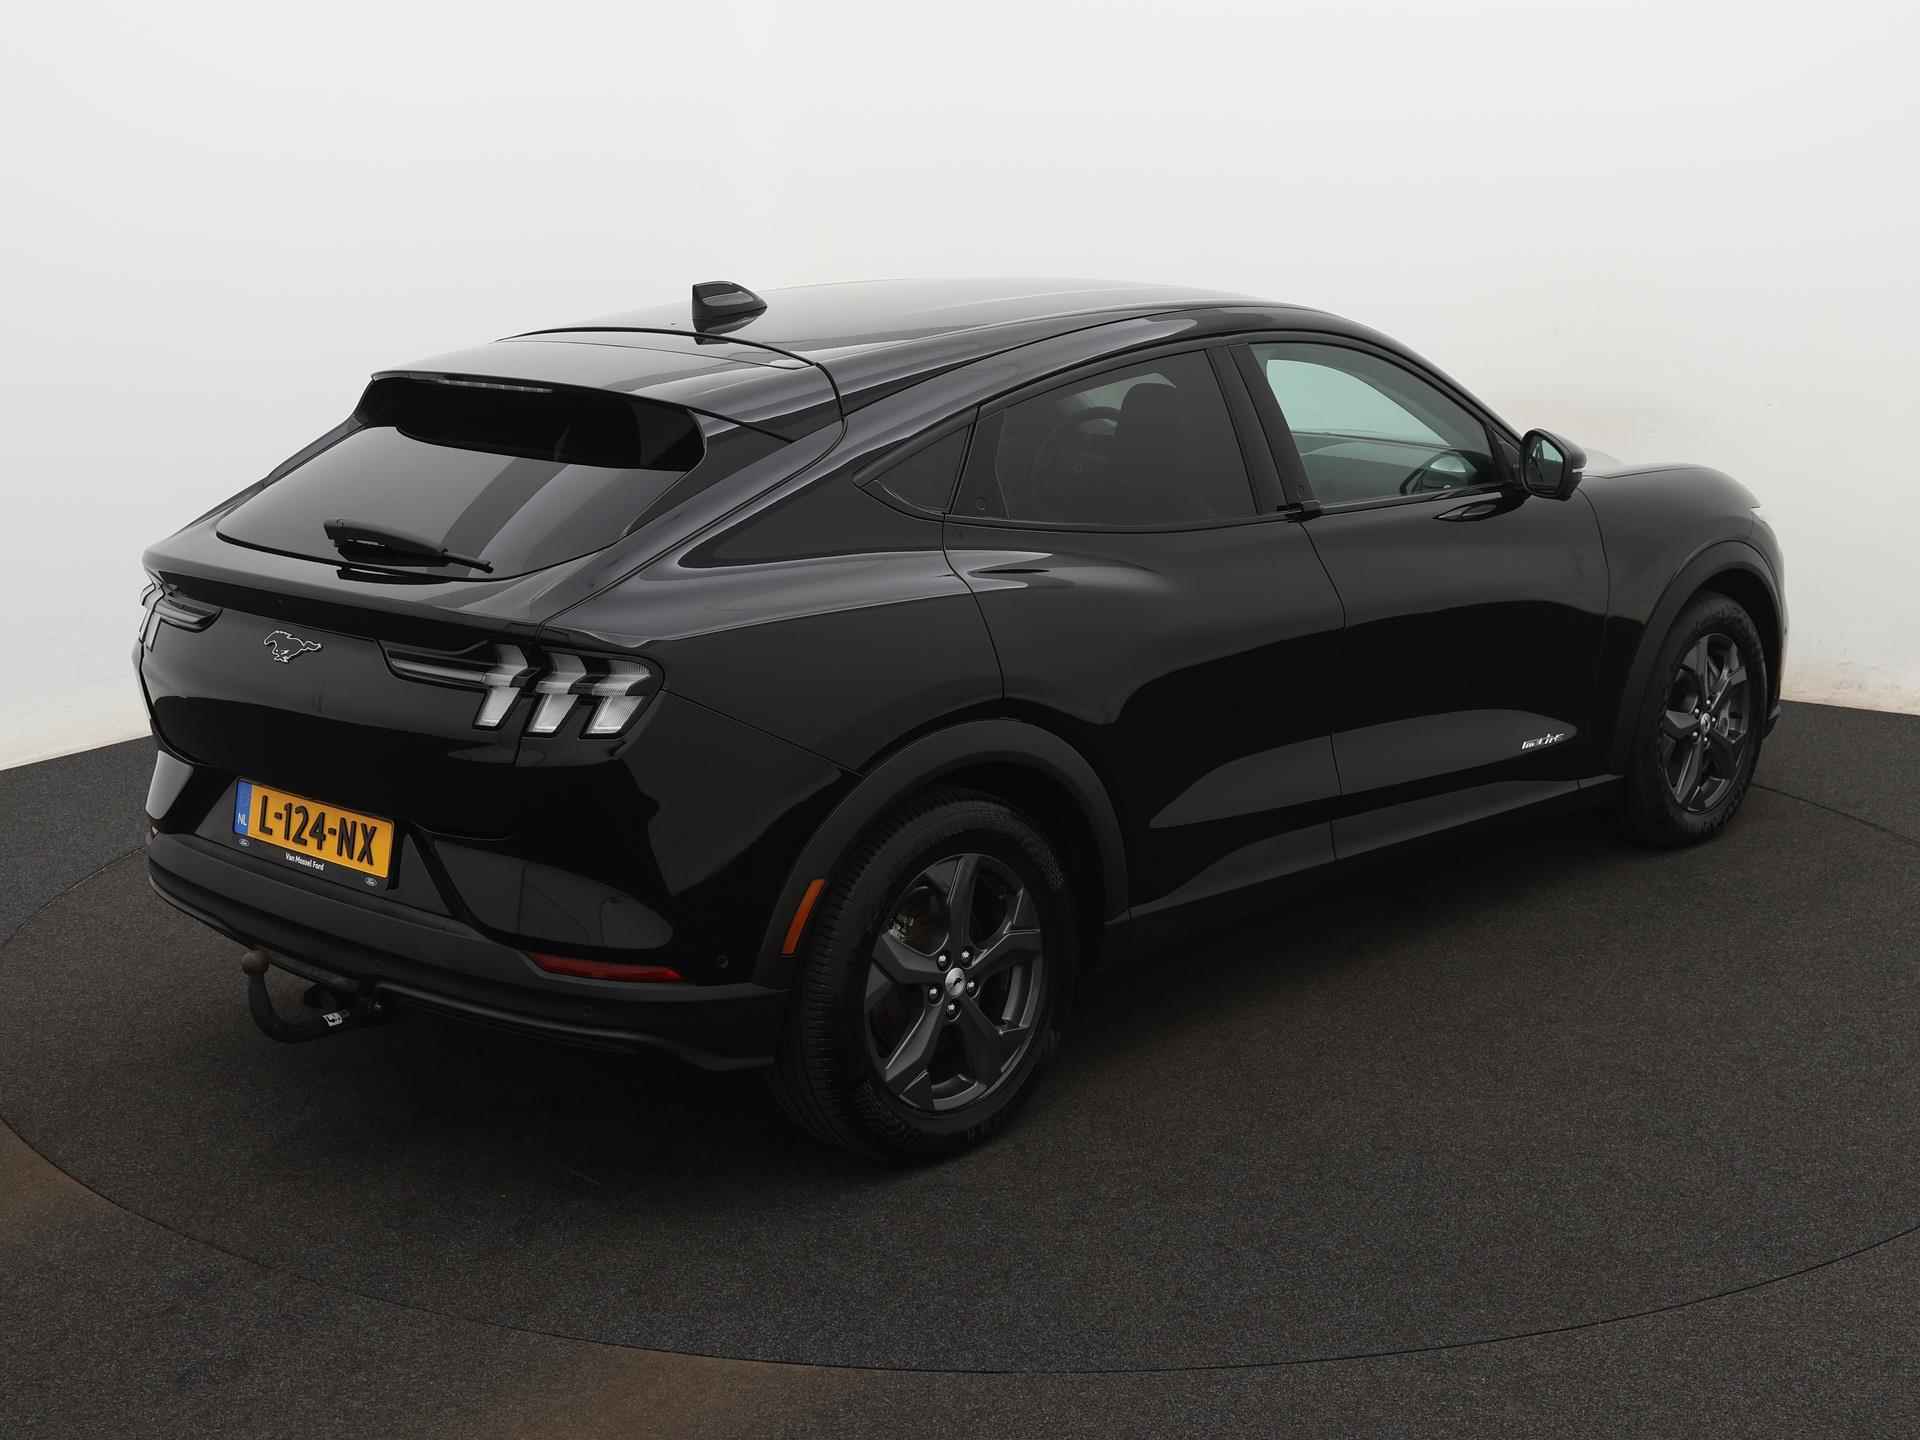 Ford Mustang Mach-E 75kWh RWD 2021 Bijtelling - 7/21